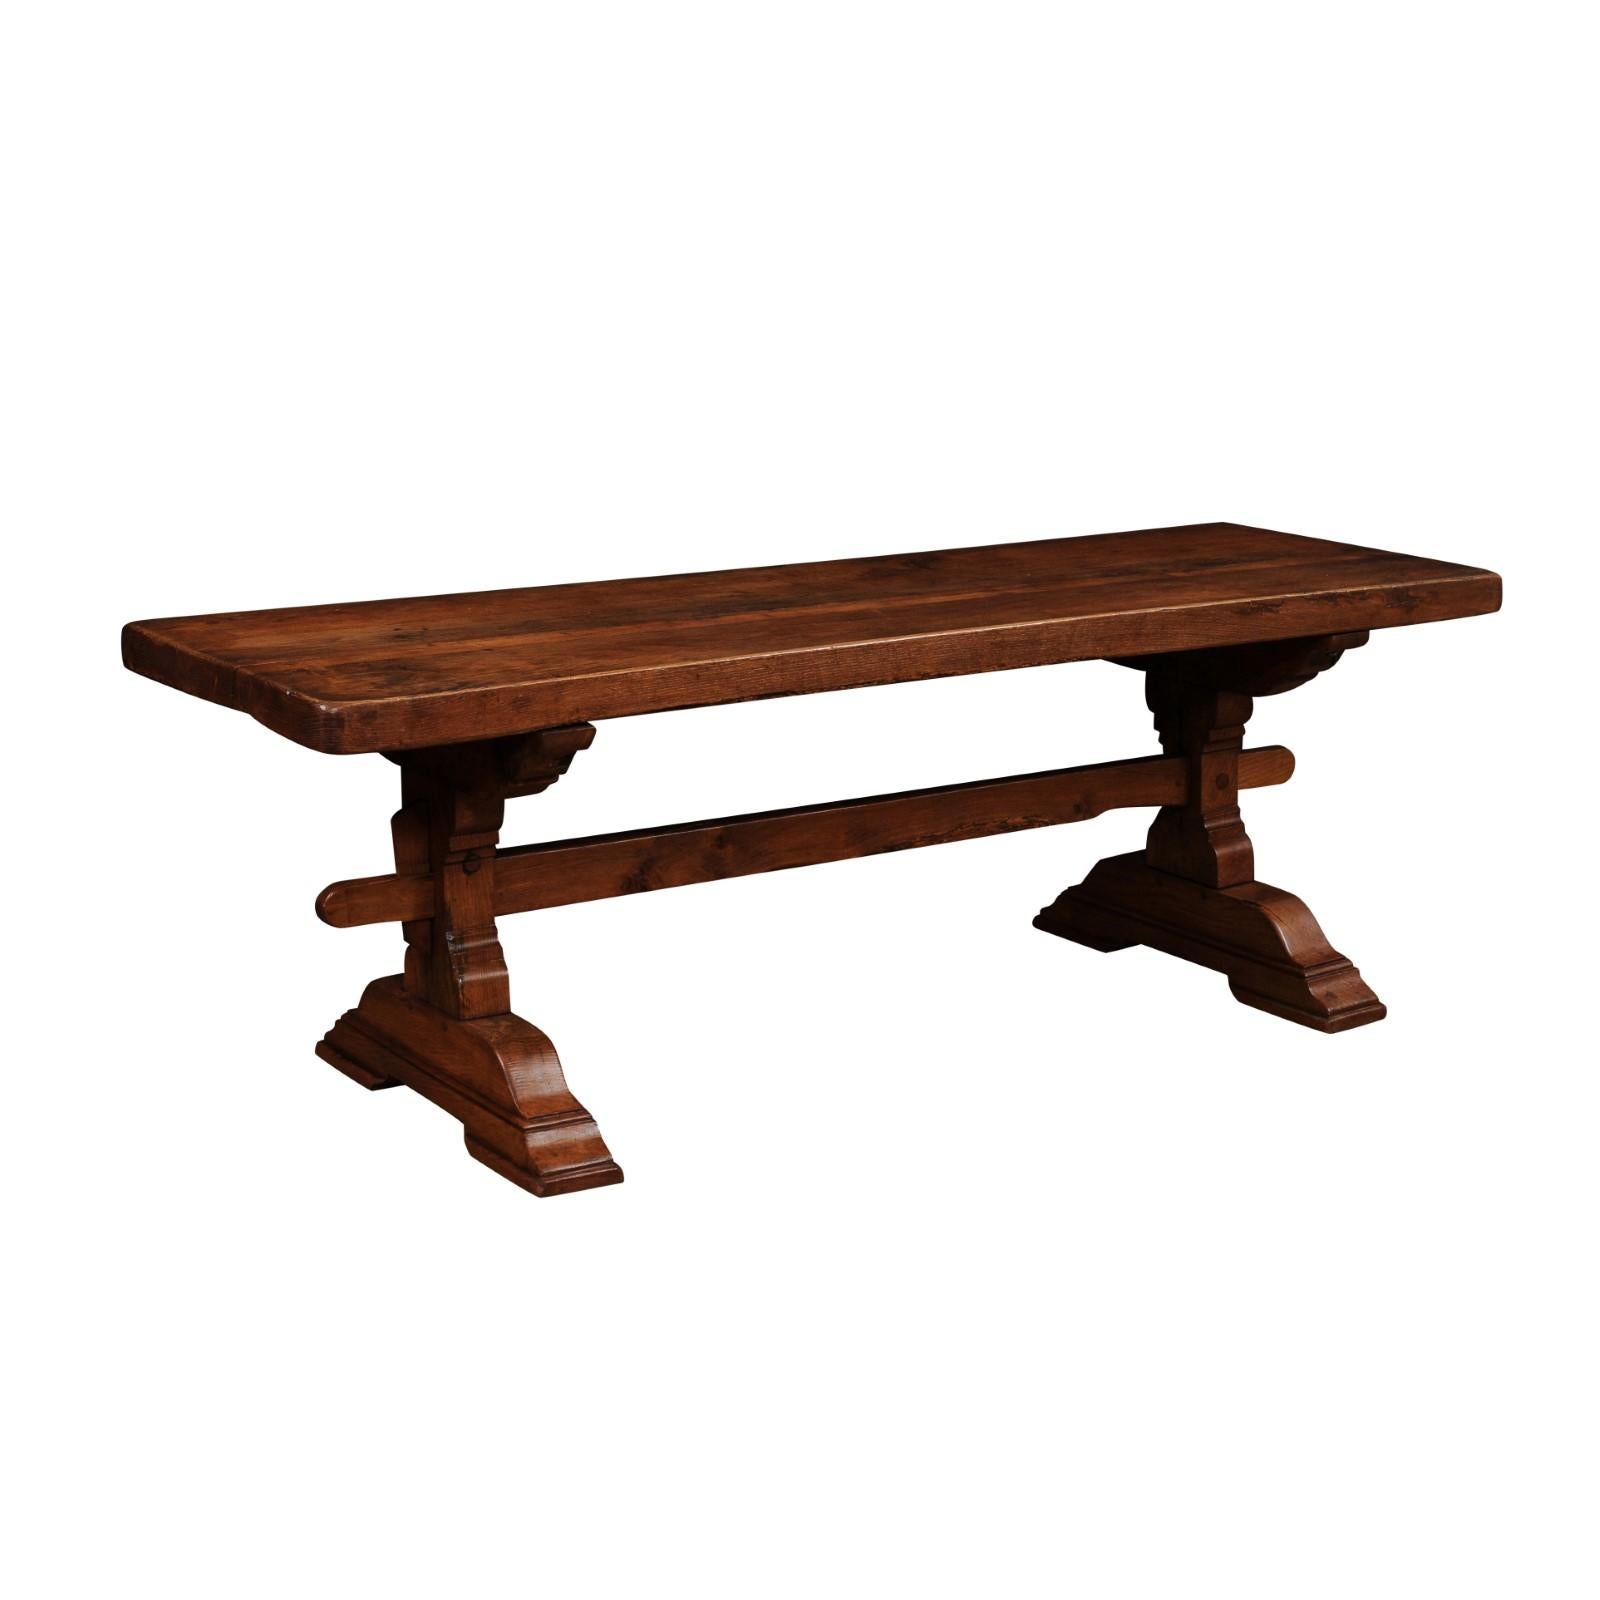 A French solid oak monastery table from circa 1890 with trestle base. This French solid oak monastery table, dating back to around 1890, is a testament to timeless craftsmanship and enduring authenticity. Crafted from substantial European oak, its